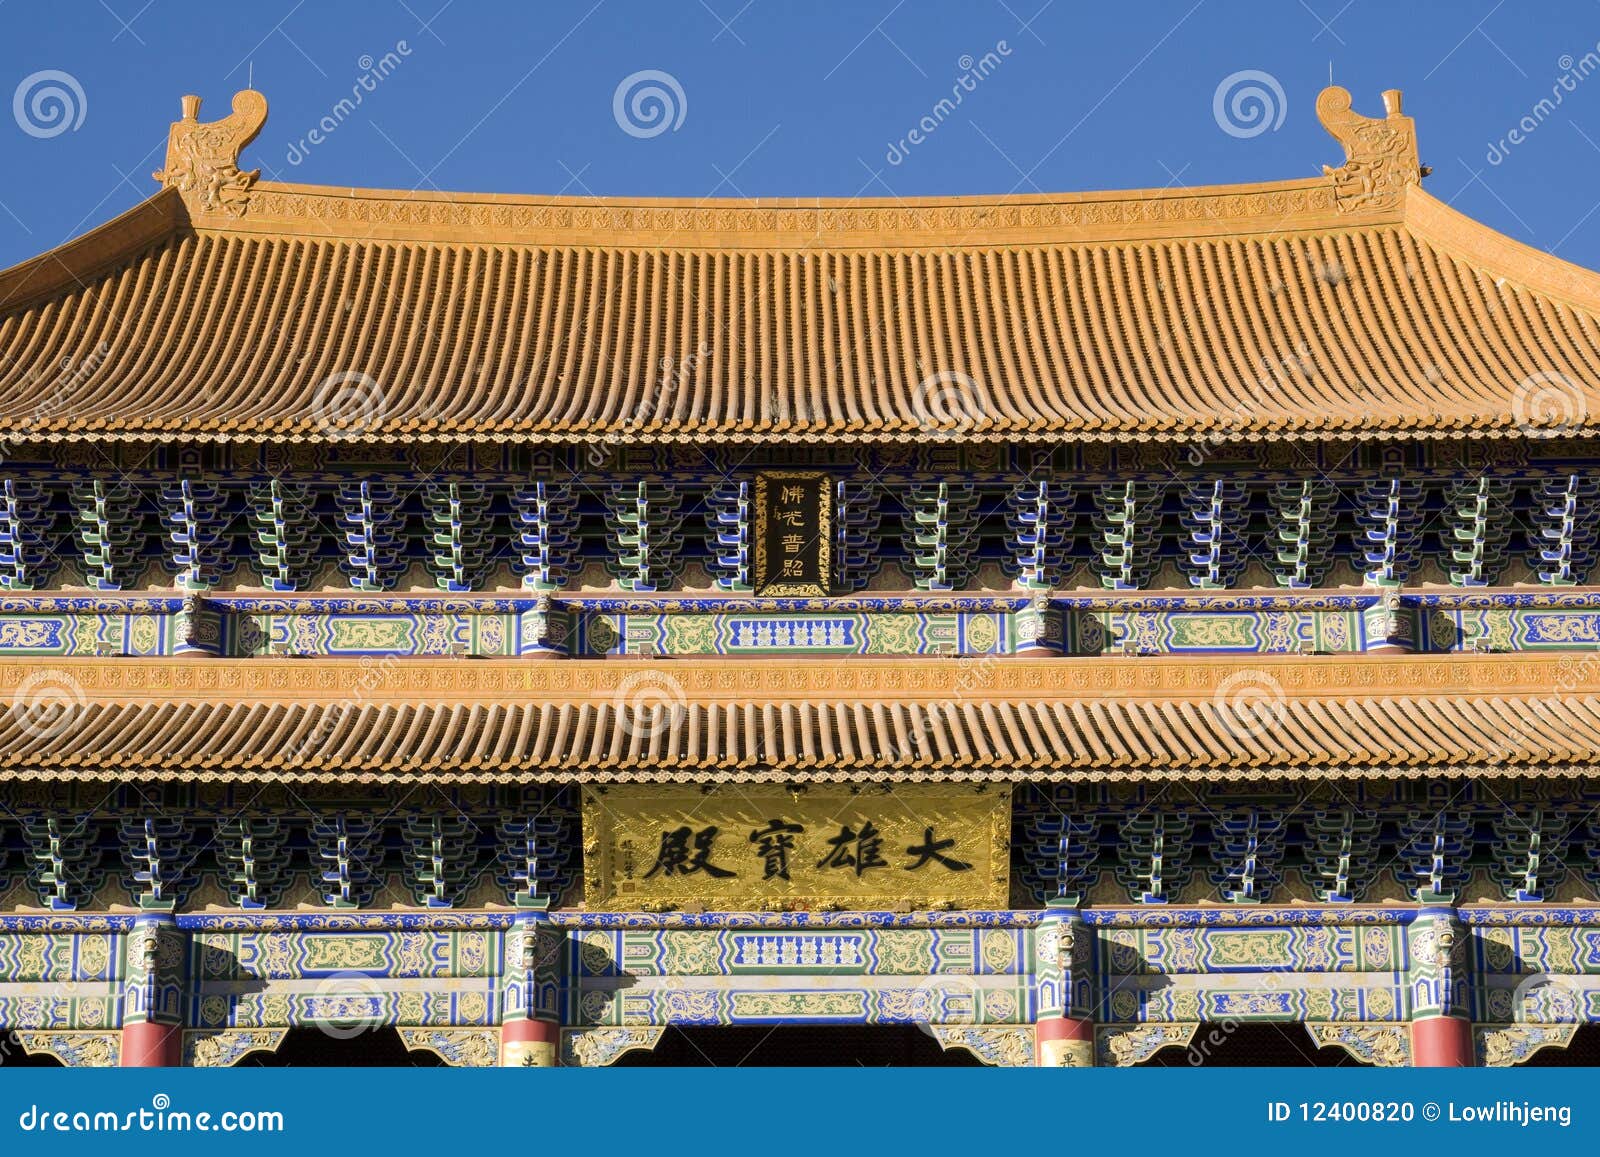 closeup of chinese temple roof and eaves